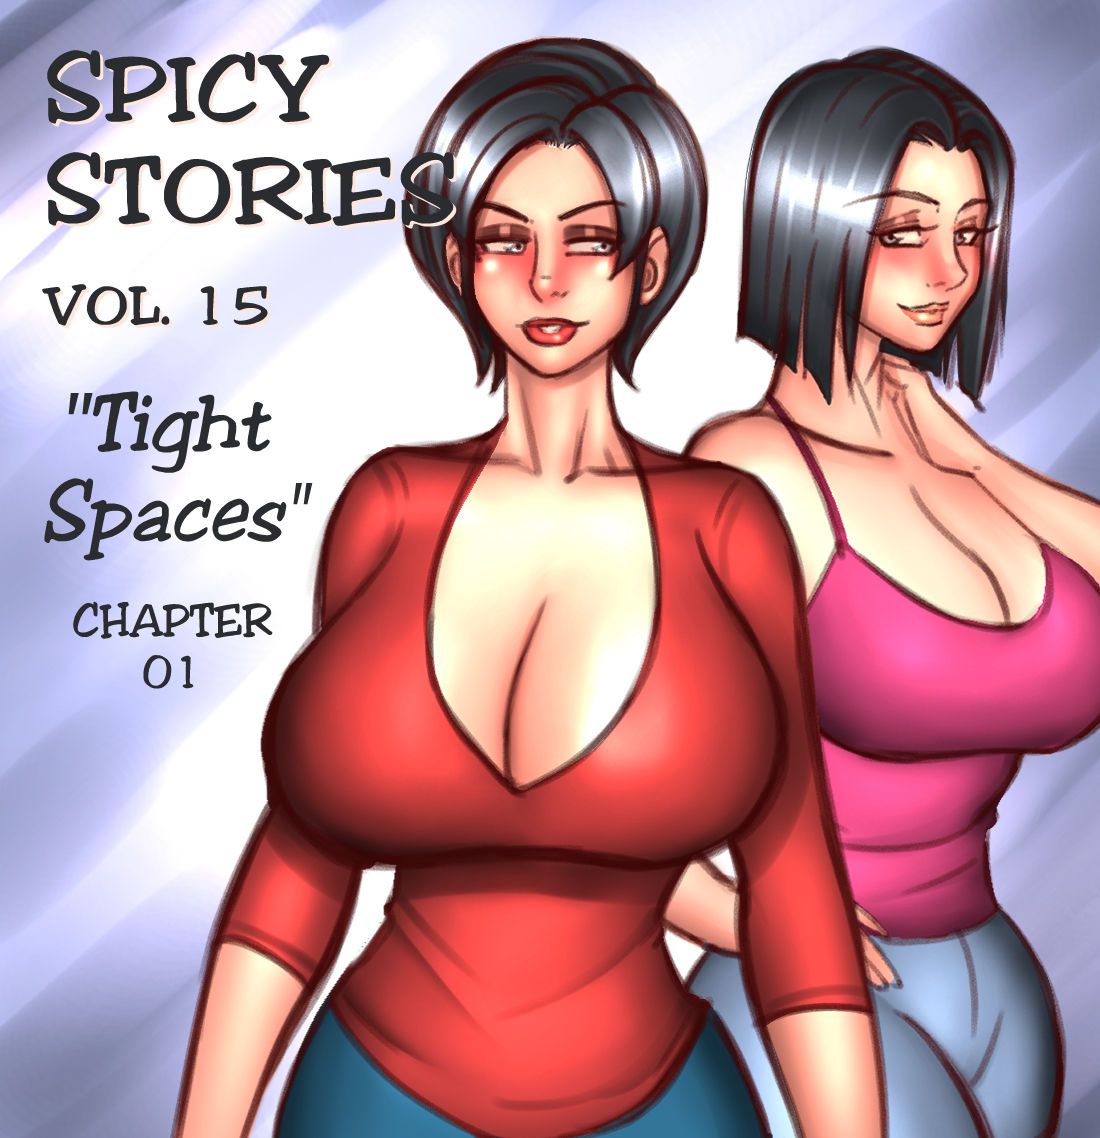 NGT Spicy Stories 15 - Tight Spaces (Ongoing) NGT Spicy Stories 15 - Tight Spaces (Ongoing) 1